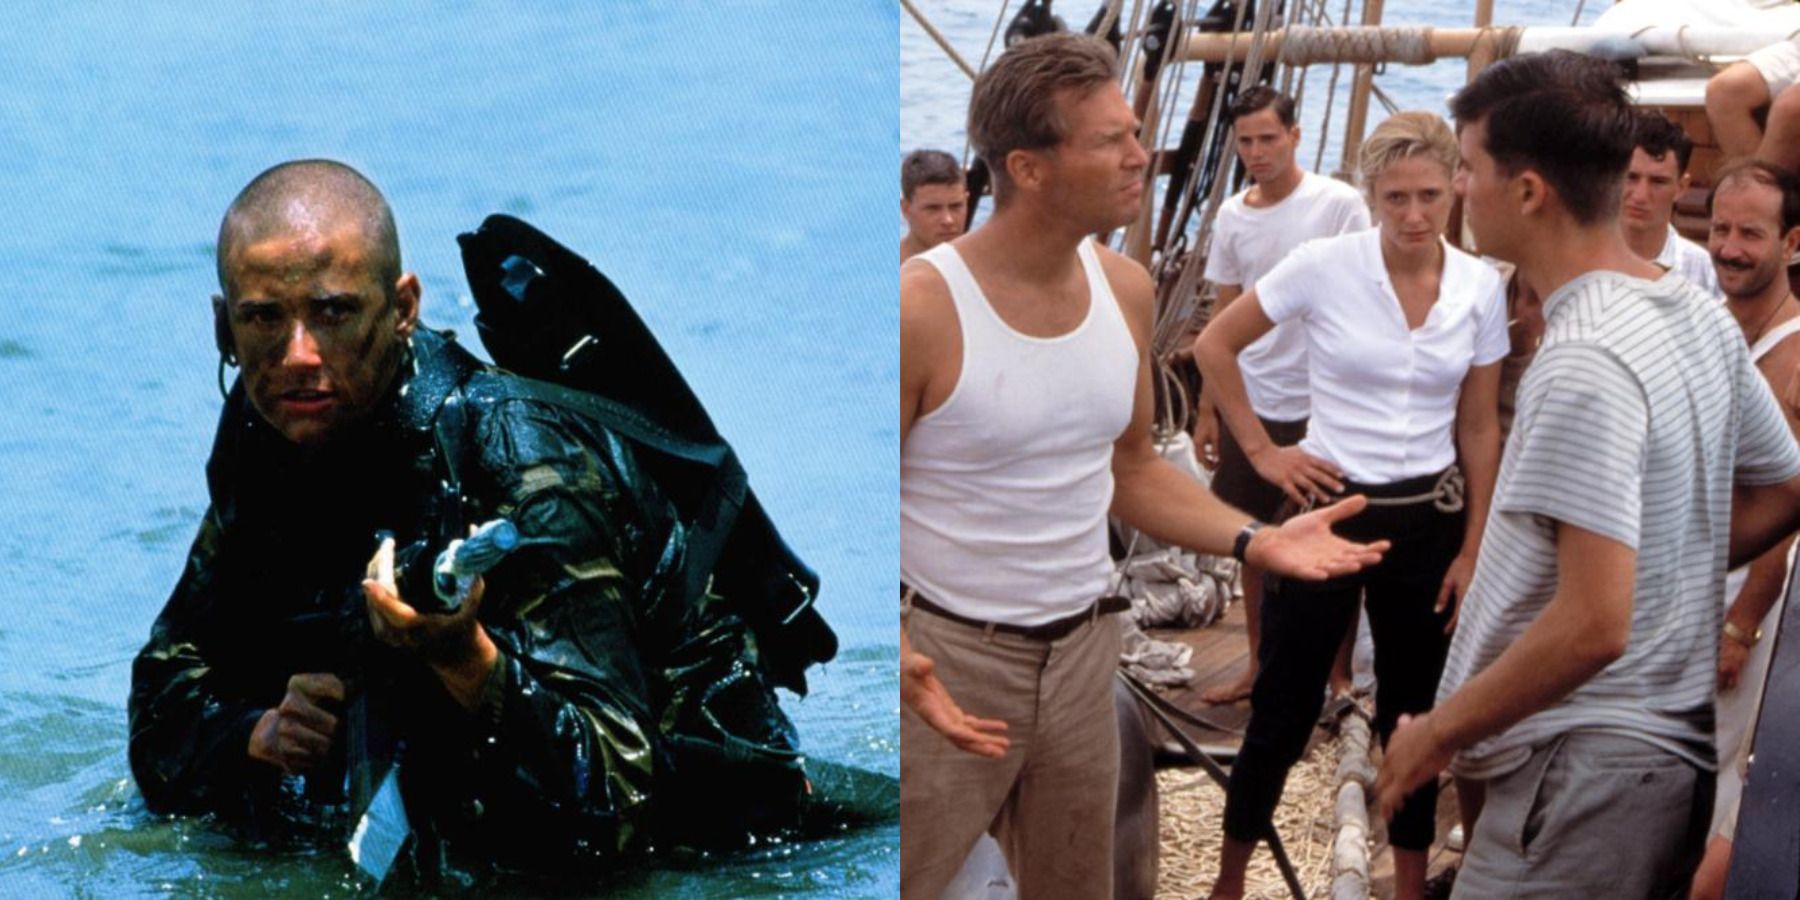 Ridley Scott underappreciated movies feature split image G.I. Jane and White Squall